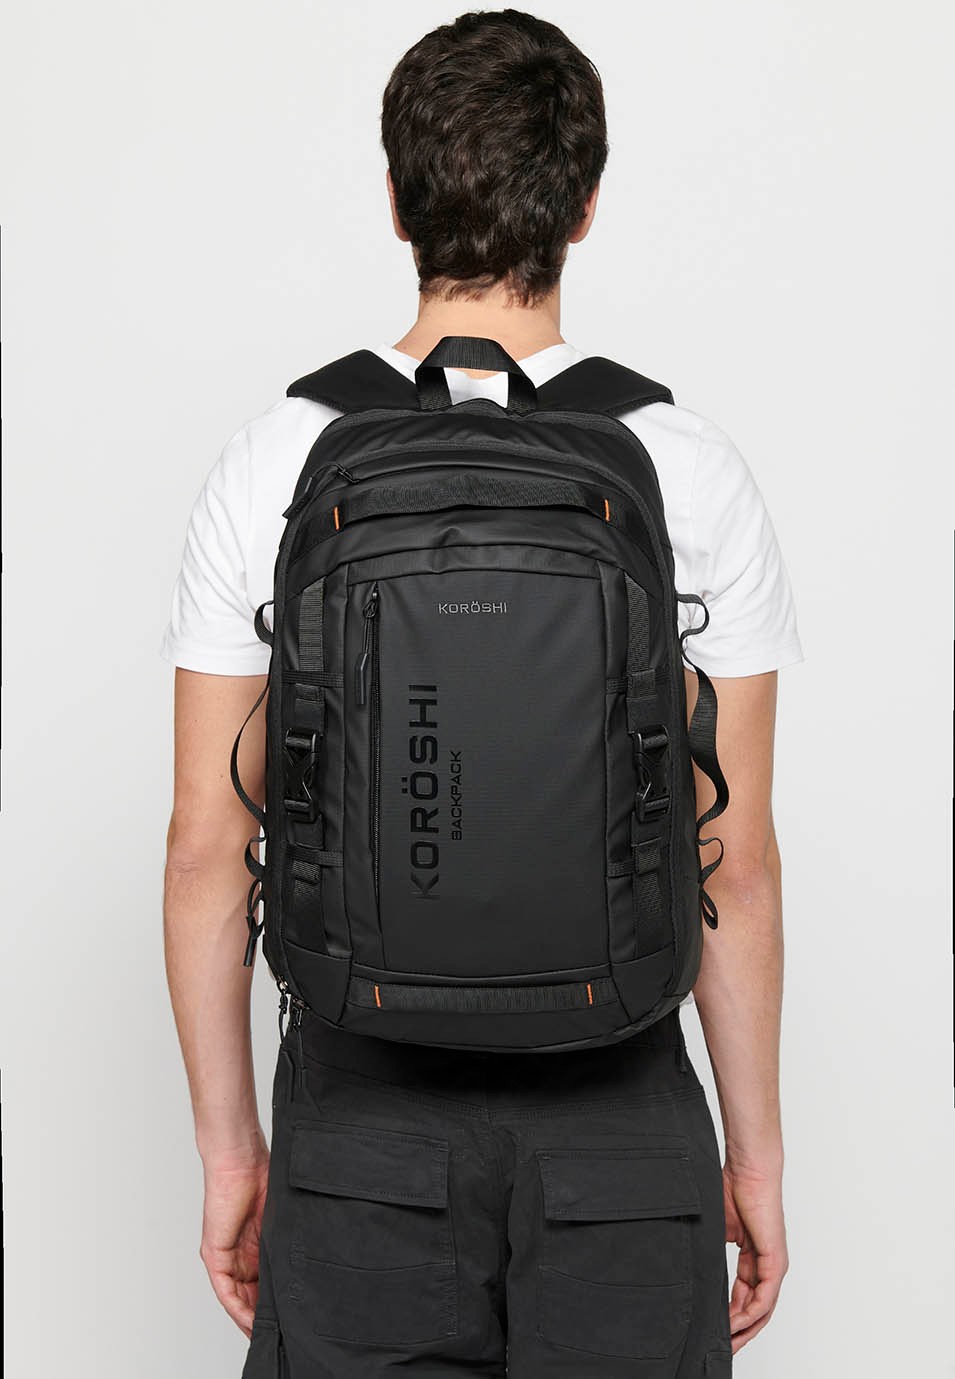 Koröshi backpack with two zippered compartments, one for a laptop and adjustable straps in Black 5